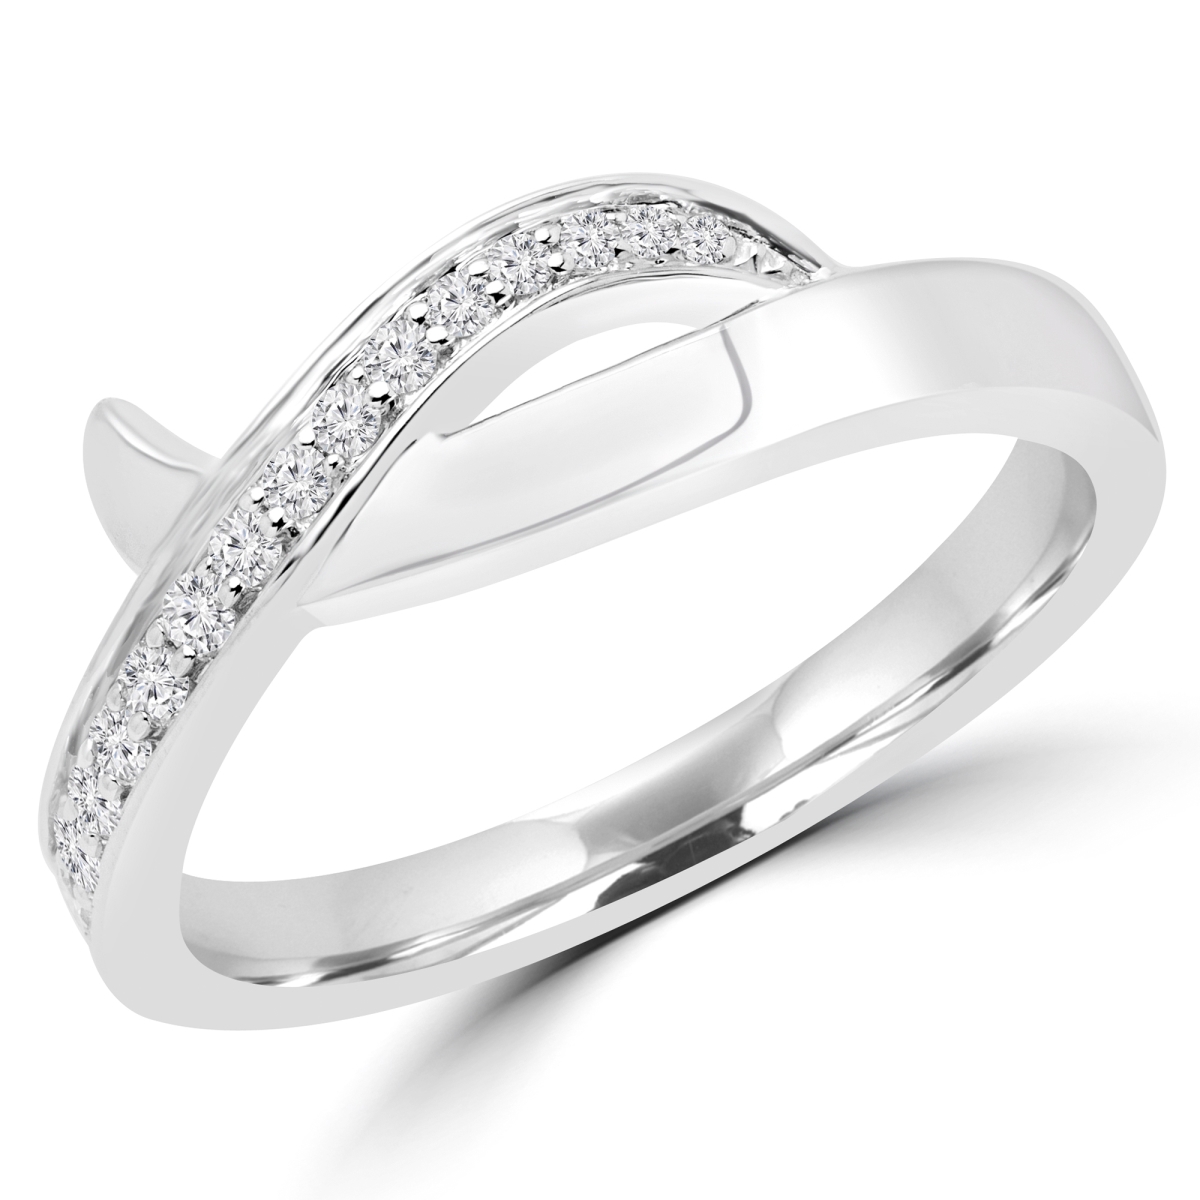 Picture of Majesty Diamonds MDR170054 0.16 CTW Round Diamond Cocktail Ring in 14K